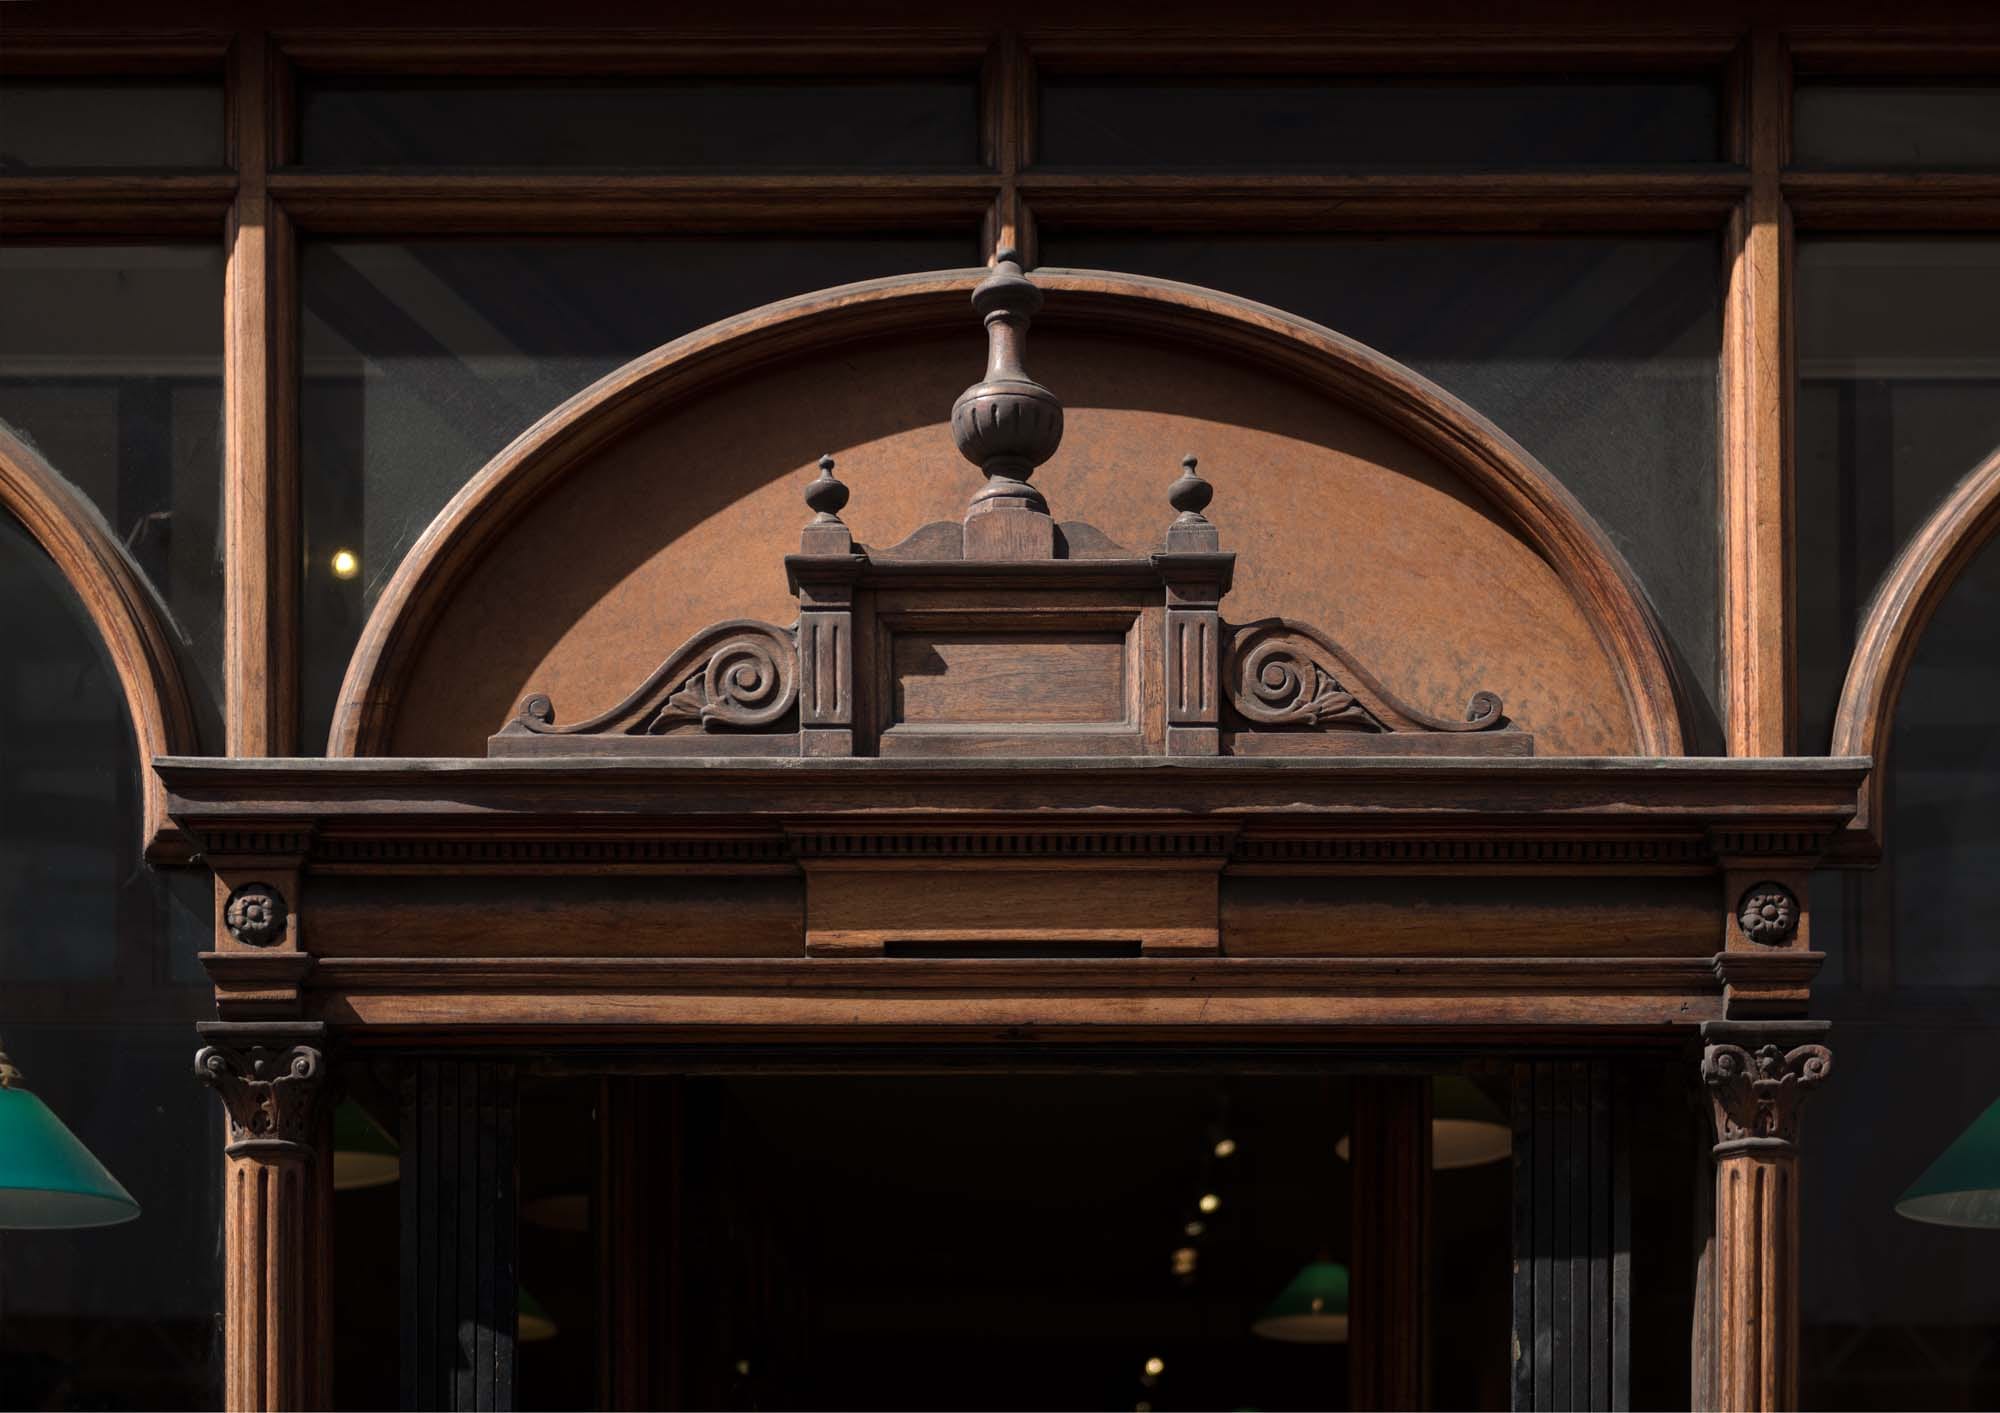 Pediment over the entrance to Daunt Books, 83 Marylebone High Street. Photographed by Chris Redgrave © Historic England.